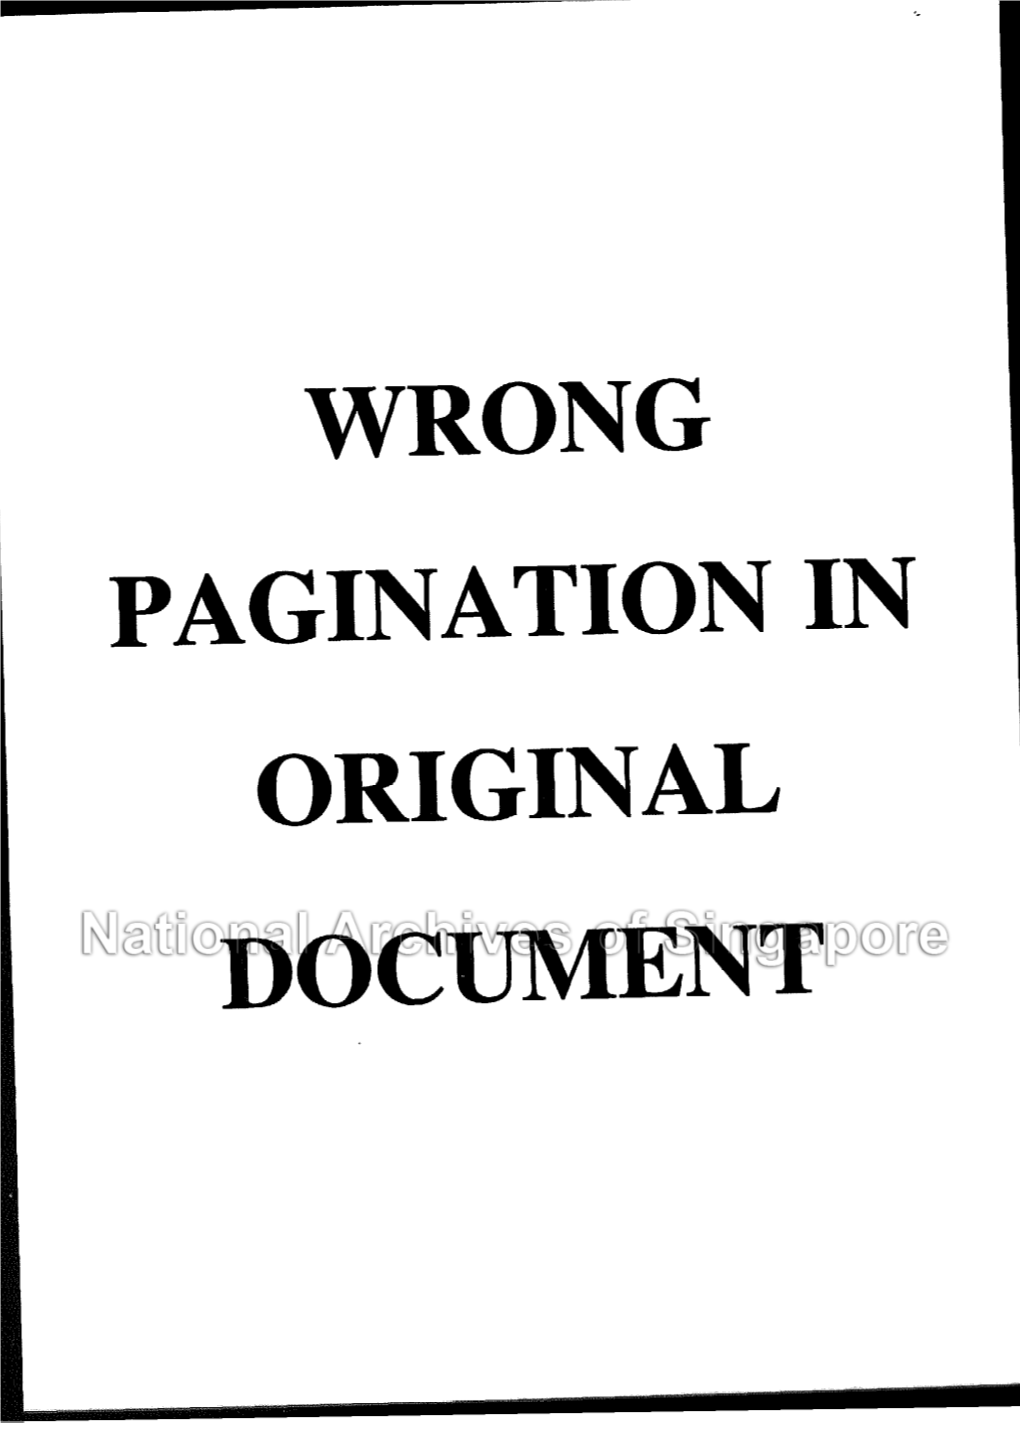 WRONG PAGINATION in ORIGINAL DOCUMENT National Archives Library 25 MAR 1992 Release No.: 09/MAR